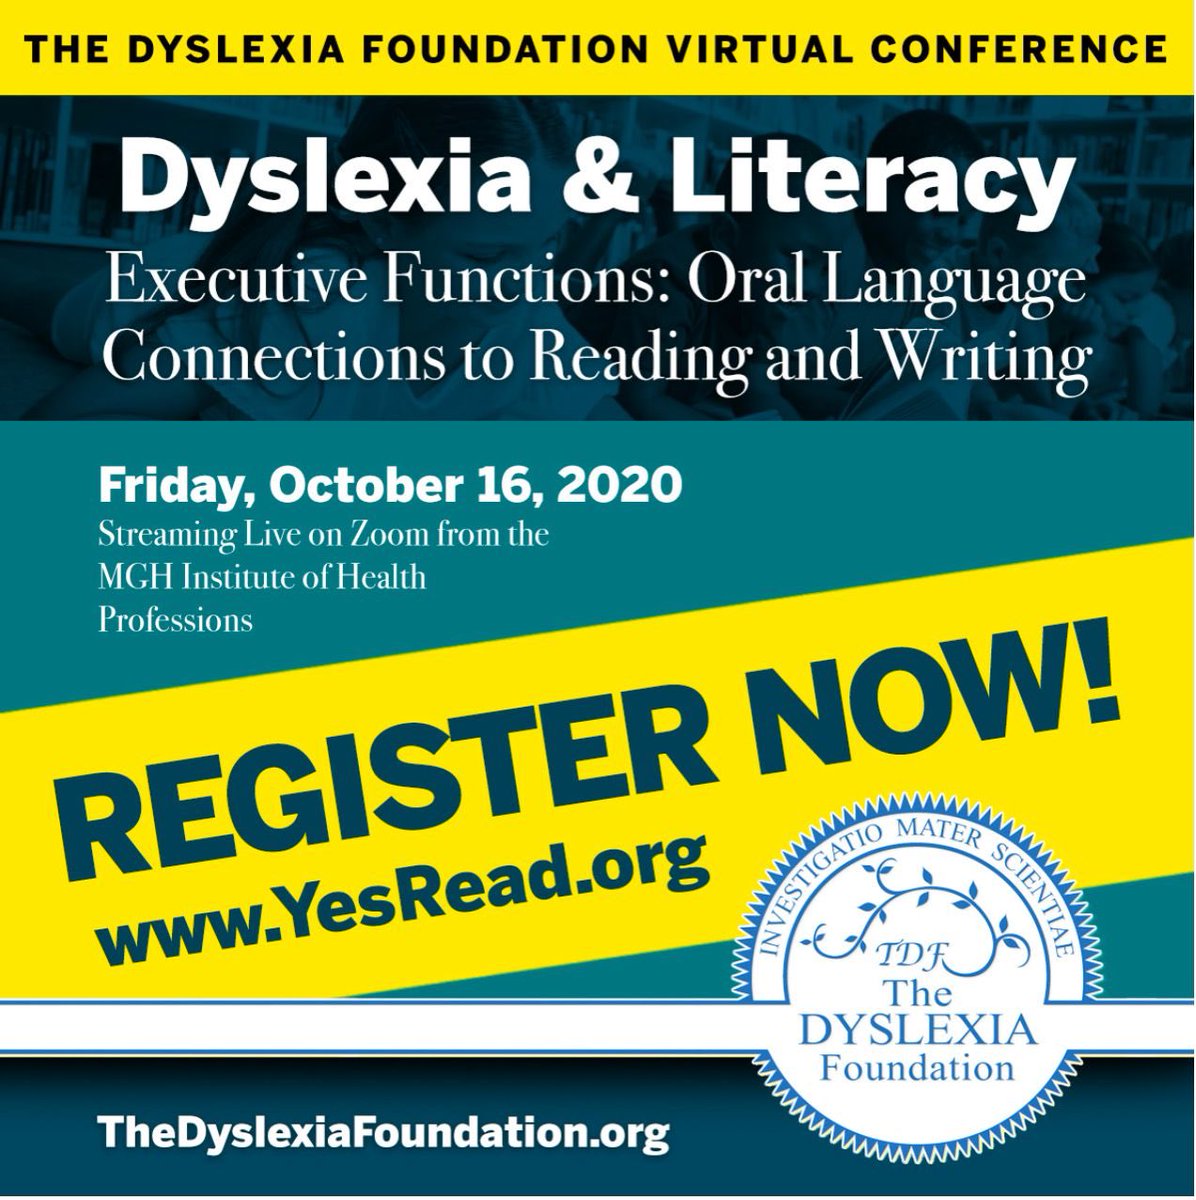 Join us next Friday, register now at yesread.org. #dyslexia #literacy #thedyslexiafoundation